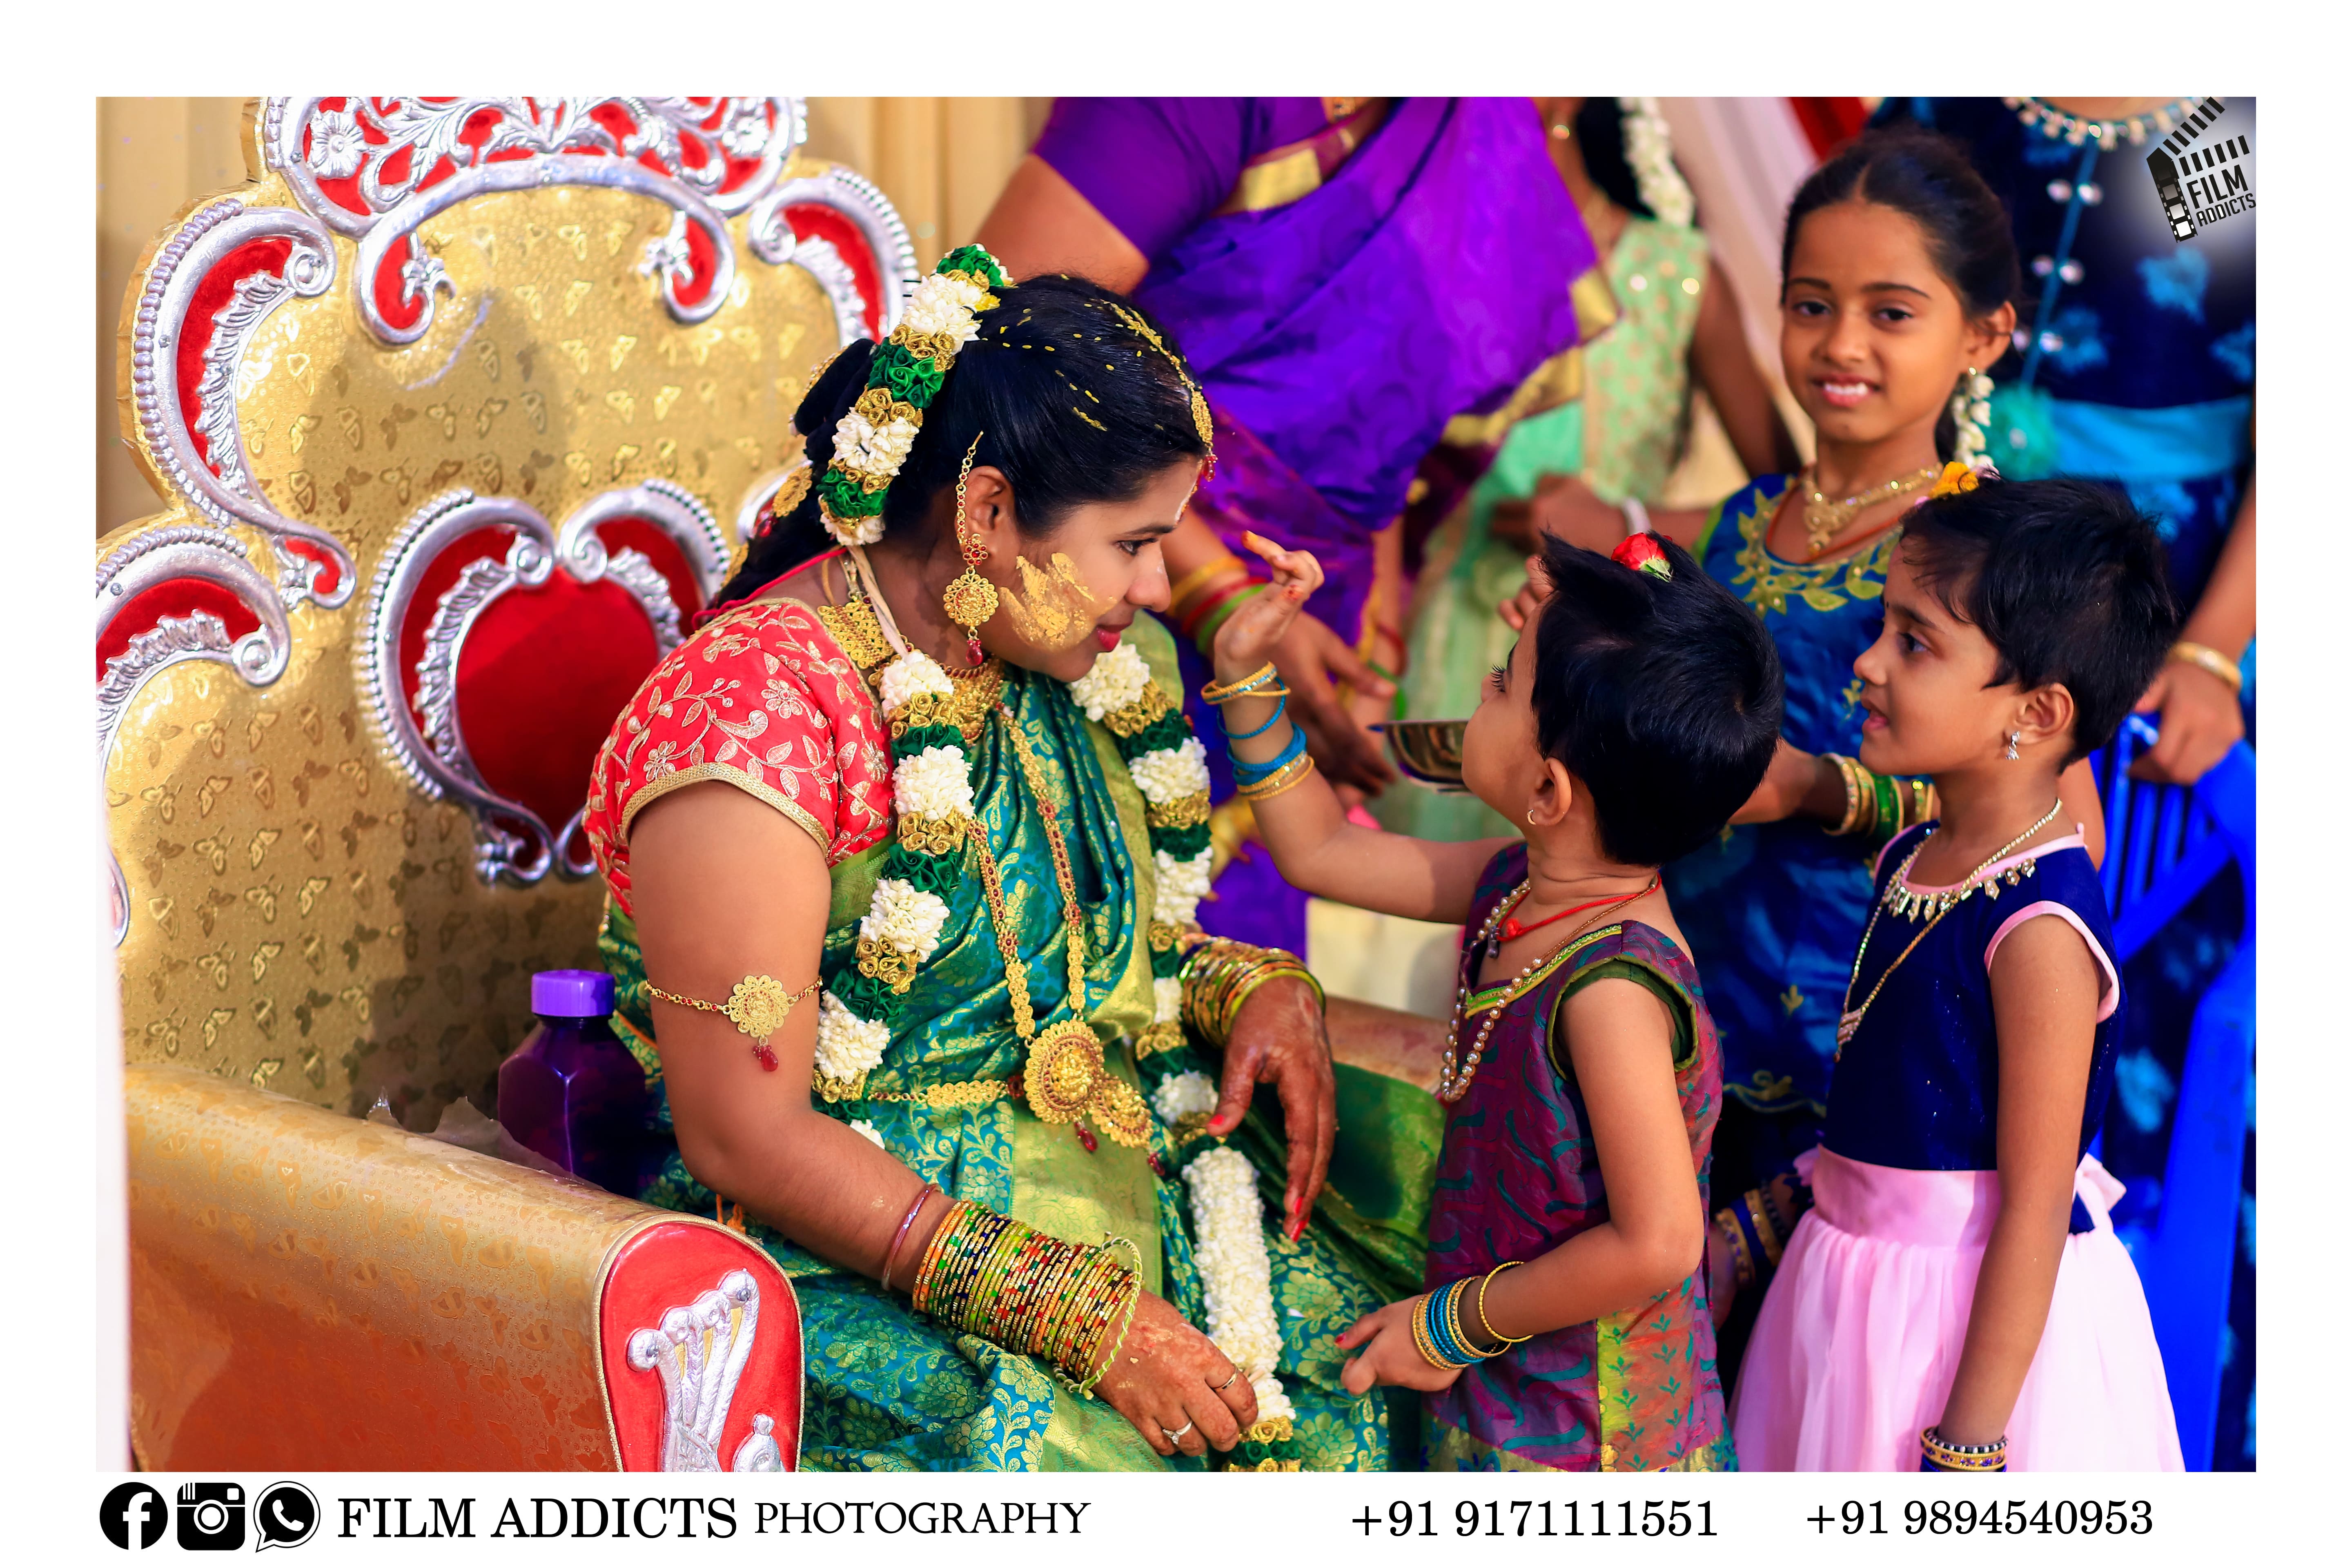 Best Maternity Photographers in Sivagangai, best Maternity photographers in Sivaganga, Best Baby Shower Photographers in Sivagangai, best Baby Shower photographers in Sivaganga,best Baby Shower photography in Sivagangai,best candid photographers in Sivagangai,best candid photography in Sivagangai,best marriage photographers in Sivagangai,best marriage photography in Sivagangai,best photographers in Sivagangai,best photography in Sivagangai,best Baby Shower candid photography in Sivagangai,best Baby Shower candid photographers in Sivagangai,best Baby Shower video in Sivagangai,best Baby Shower videographers in Sivagangai,best Baby Shower videography in Sivagangai,best candid videographers in Sivagangai,best candid videography in Sivagangai,best marriage videographers in Sivagangai,best marriage videography in Sivagangai,best videographers in Sivagangai,best videography in Sivagangai,best Baby Shower candid videography in Sivagangai,best Baby Shower candid videographers in Sivagangai,best helicam operators in Sivagangai,best drone operators in Sivagangai,best Baby Shower studio in Sivagangai,best professional photographers in Sivagangai,best professional photography in Sivagangai,No.1 Baby Shower photographers in Sivagangai,No.1 Baby Shower photography in Sivagangai,Sivagangai Baby Shower photographers,Sivagangai Baby Shower photography,Sivagangai Baby Shower videos,best candid videos in Sivagangai,best candid photos in Sivagangai,best helicam operators photography in Sivagangai,best helicam operator photographers in Sivagangai,best outdoor videography in Sivagangai,best professional Baby Shower photography in Sivagangai,best outdoor photography in Sivagangai,best outdoor photographers in Sivagangai,best drone operators photographers in Sivagangai,best Baby Shower candid videography in Sivagangai, tamilnadu Baby Shower photography, tamilnadu.